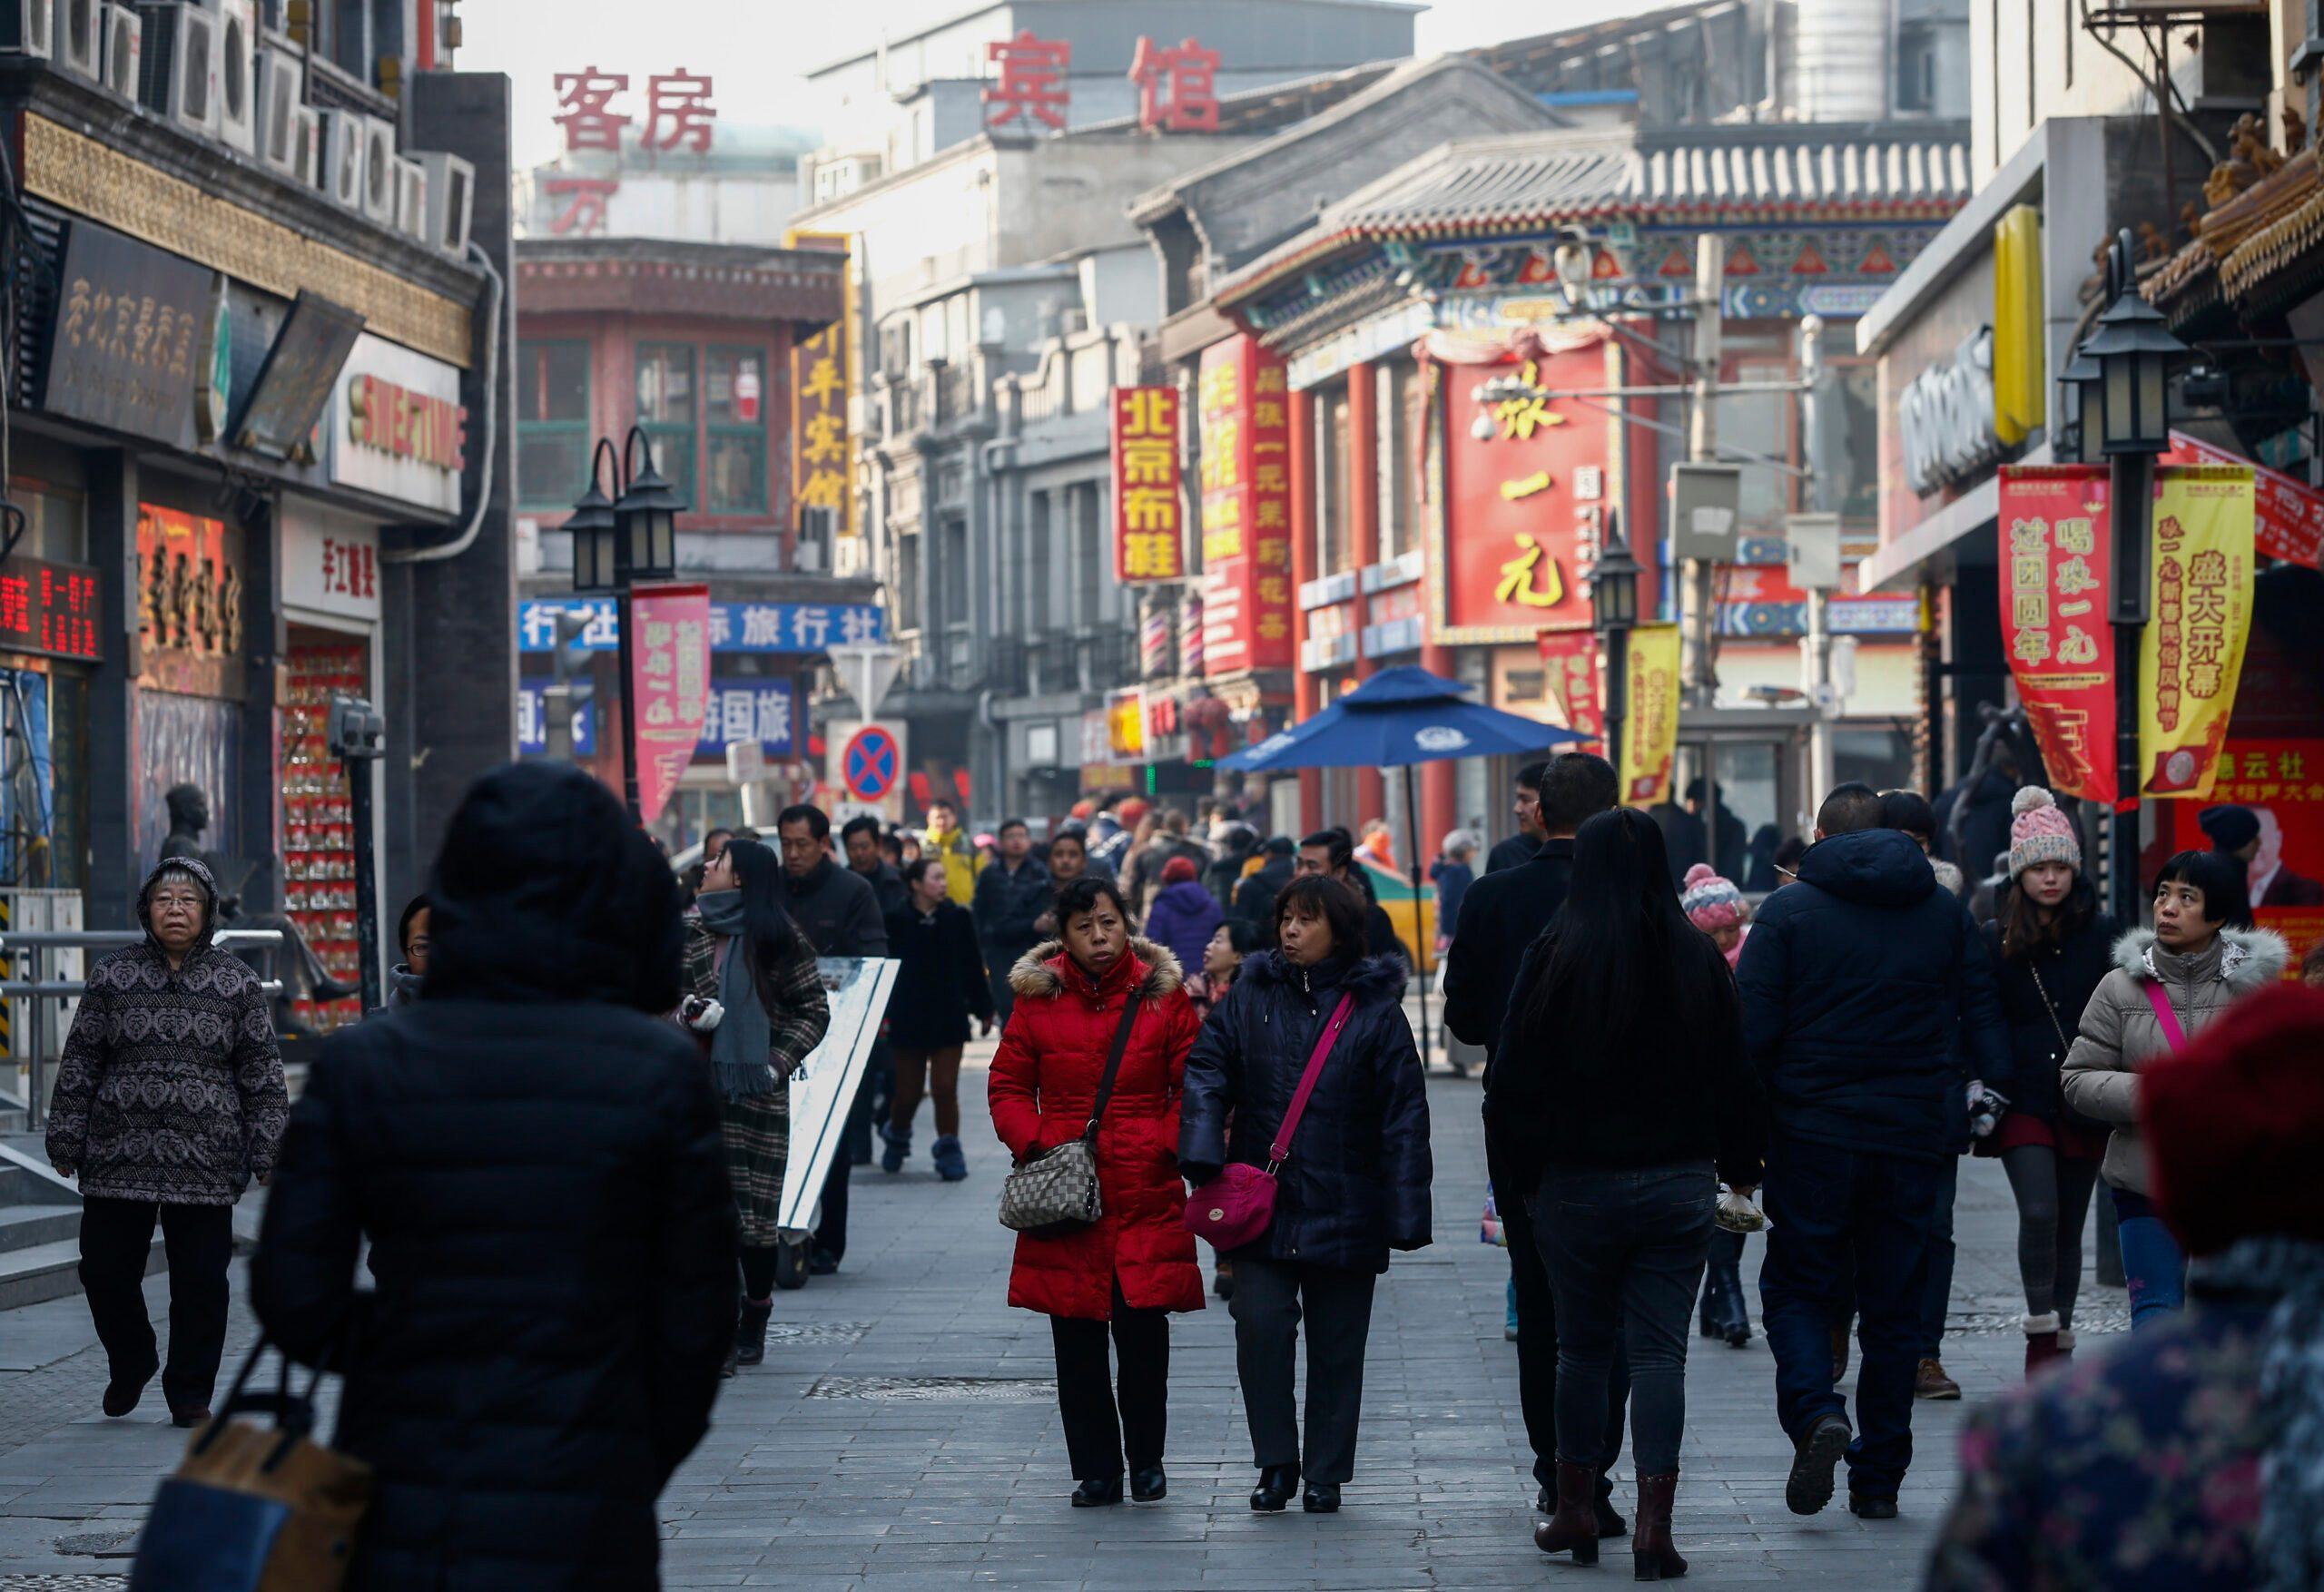 China GDP growth slows to 6.7% in 1st quarter – gov’t